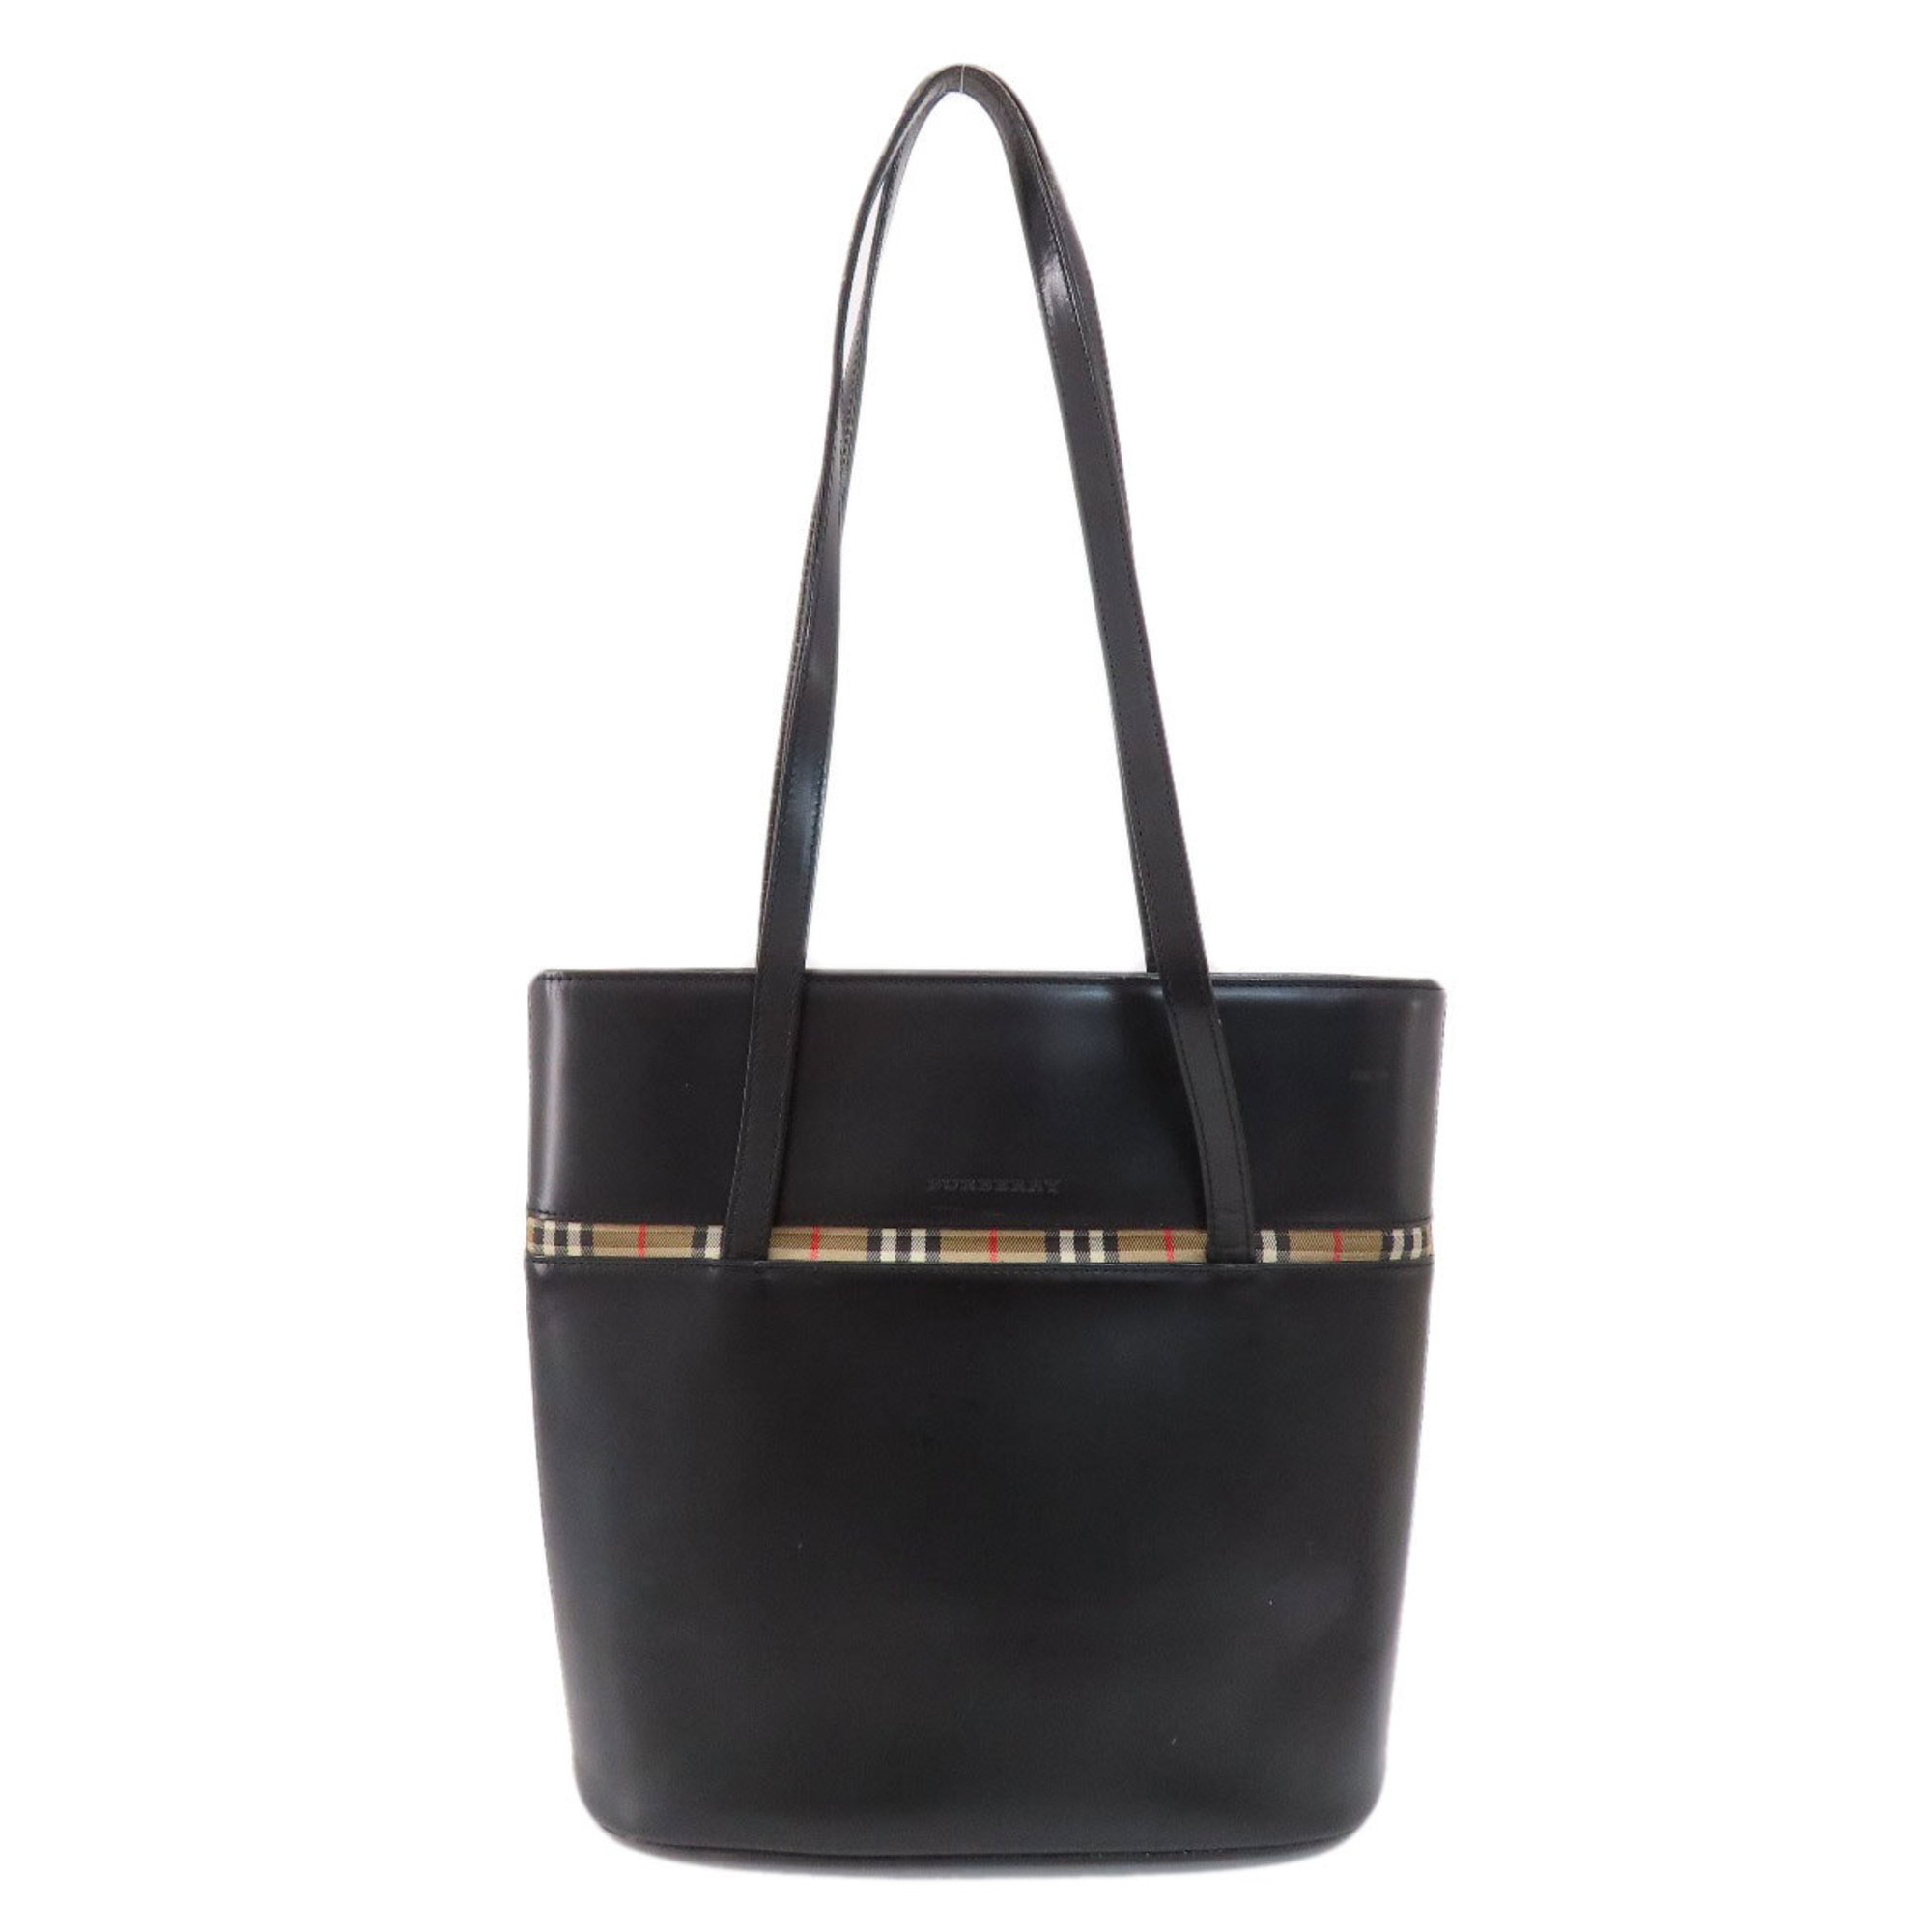 Burberry Leather Tote Bag for Women